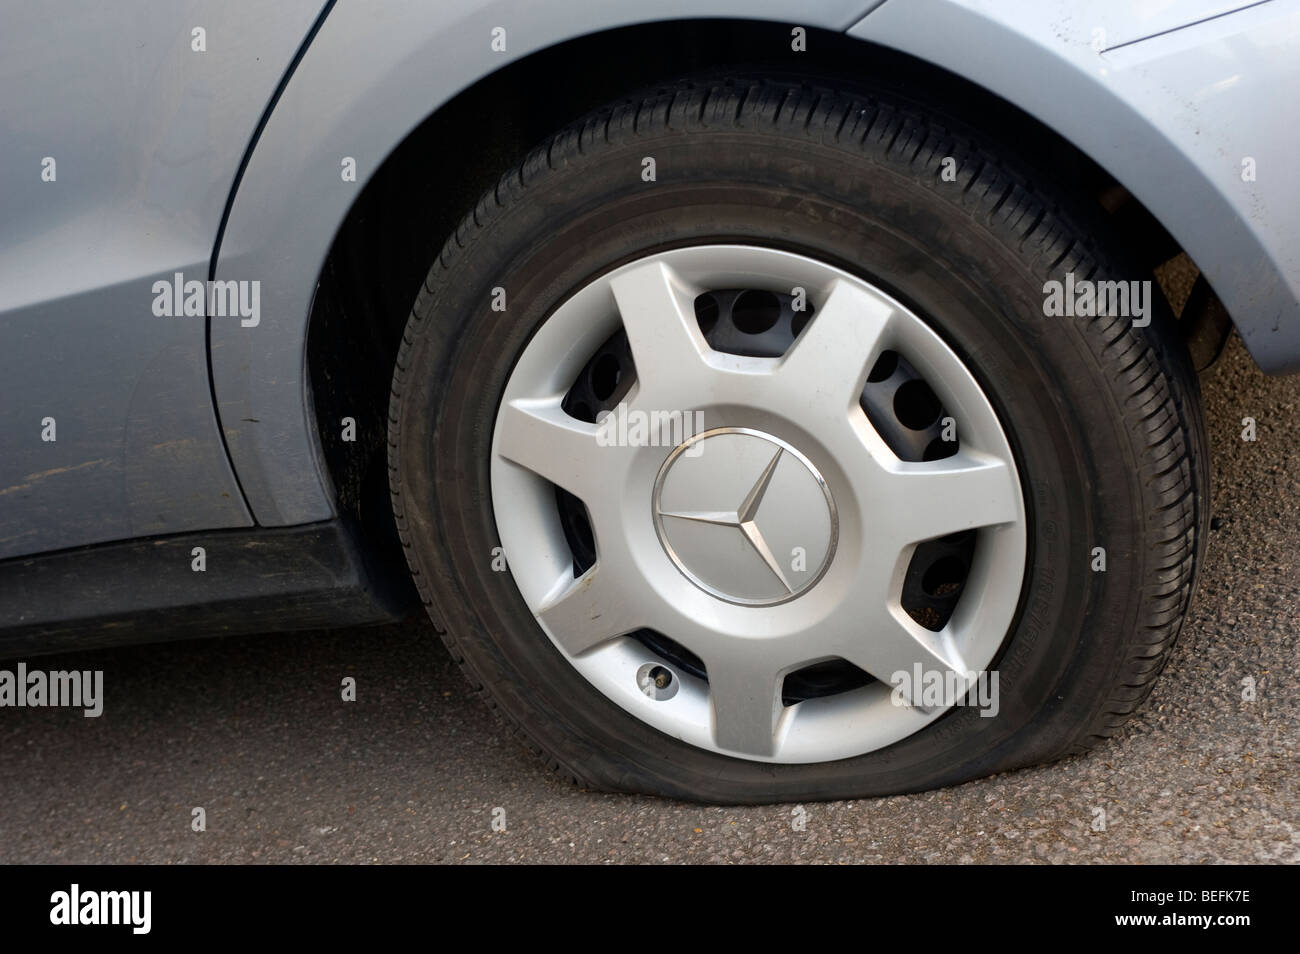 Car with a flat tyre. Stock Photo